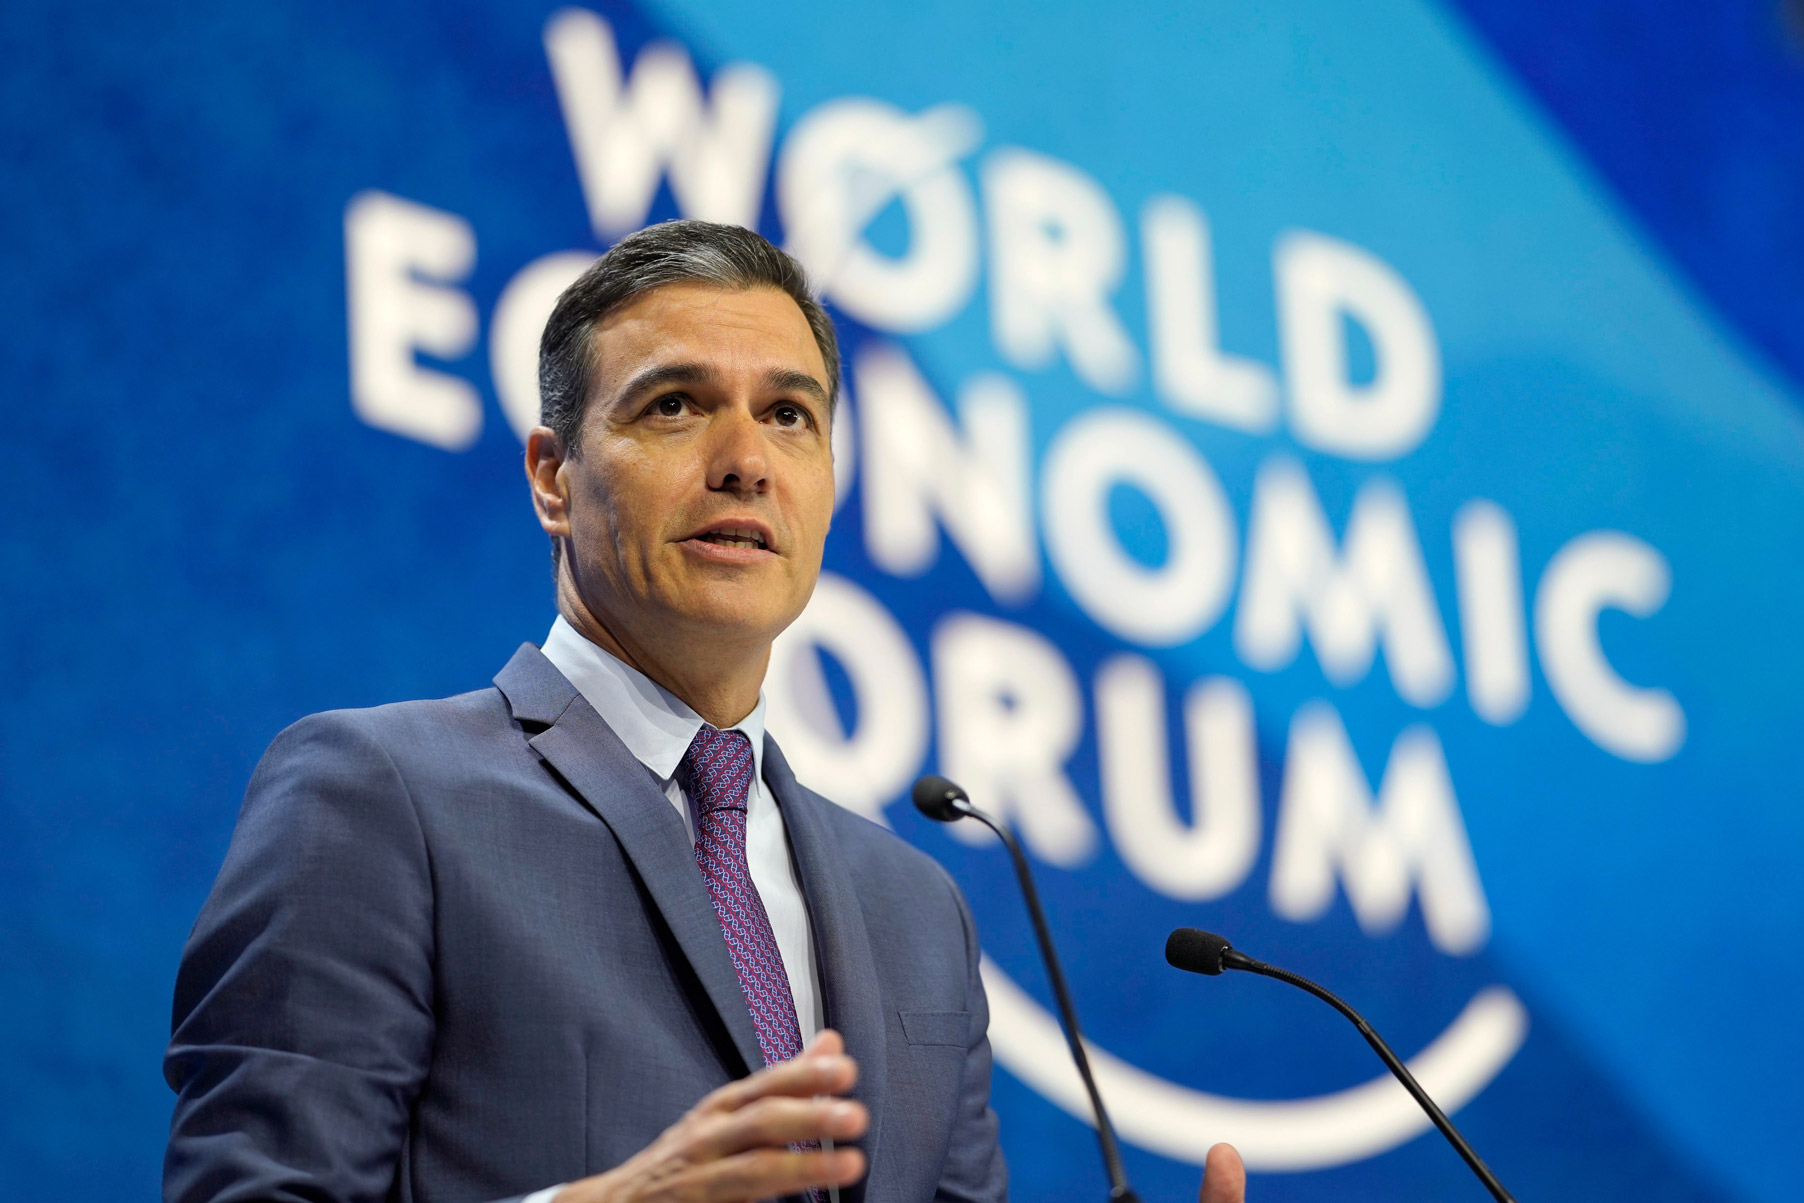 Spain's Prime Minister Pedro Sanchez delivers his speech during the World Economic Forum in Davos, Switzerland, Tuesday.